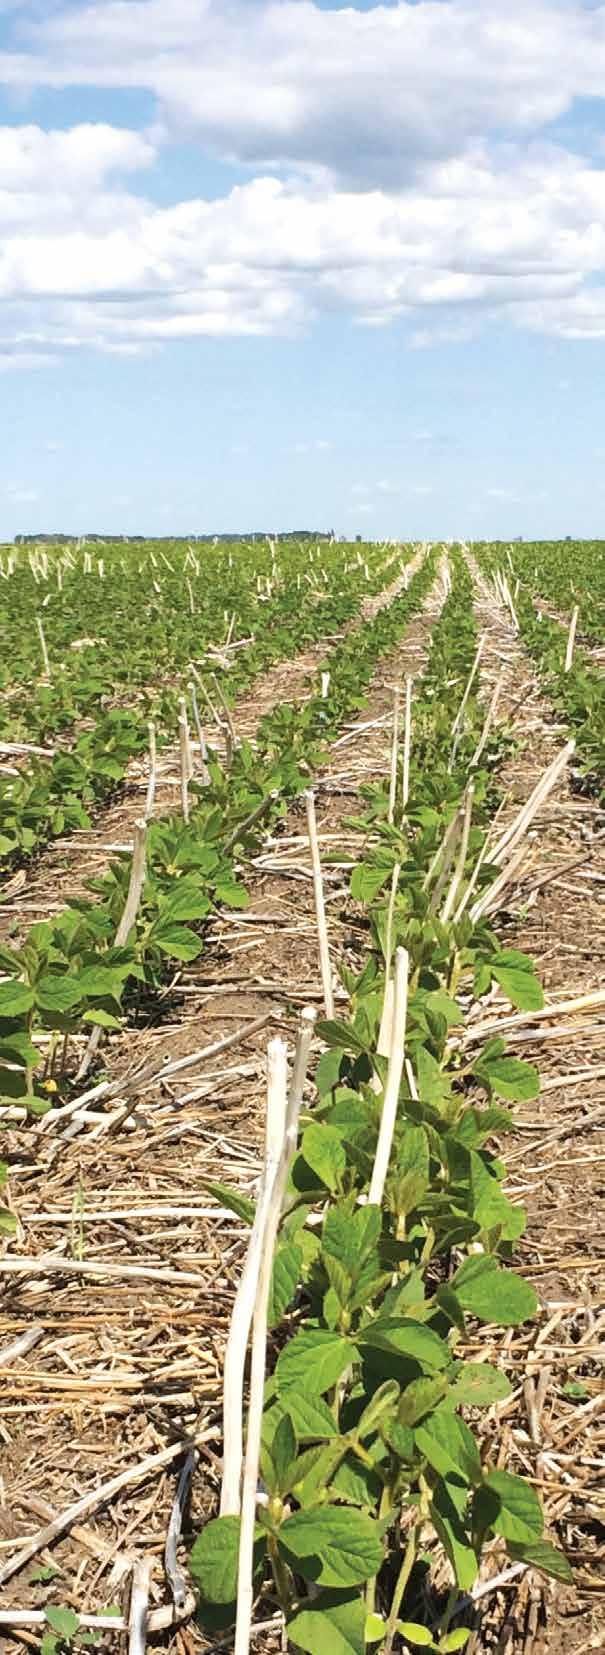 SOYBEAN How to AGTIVATE your crop on canola stubble?